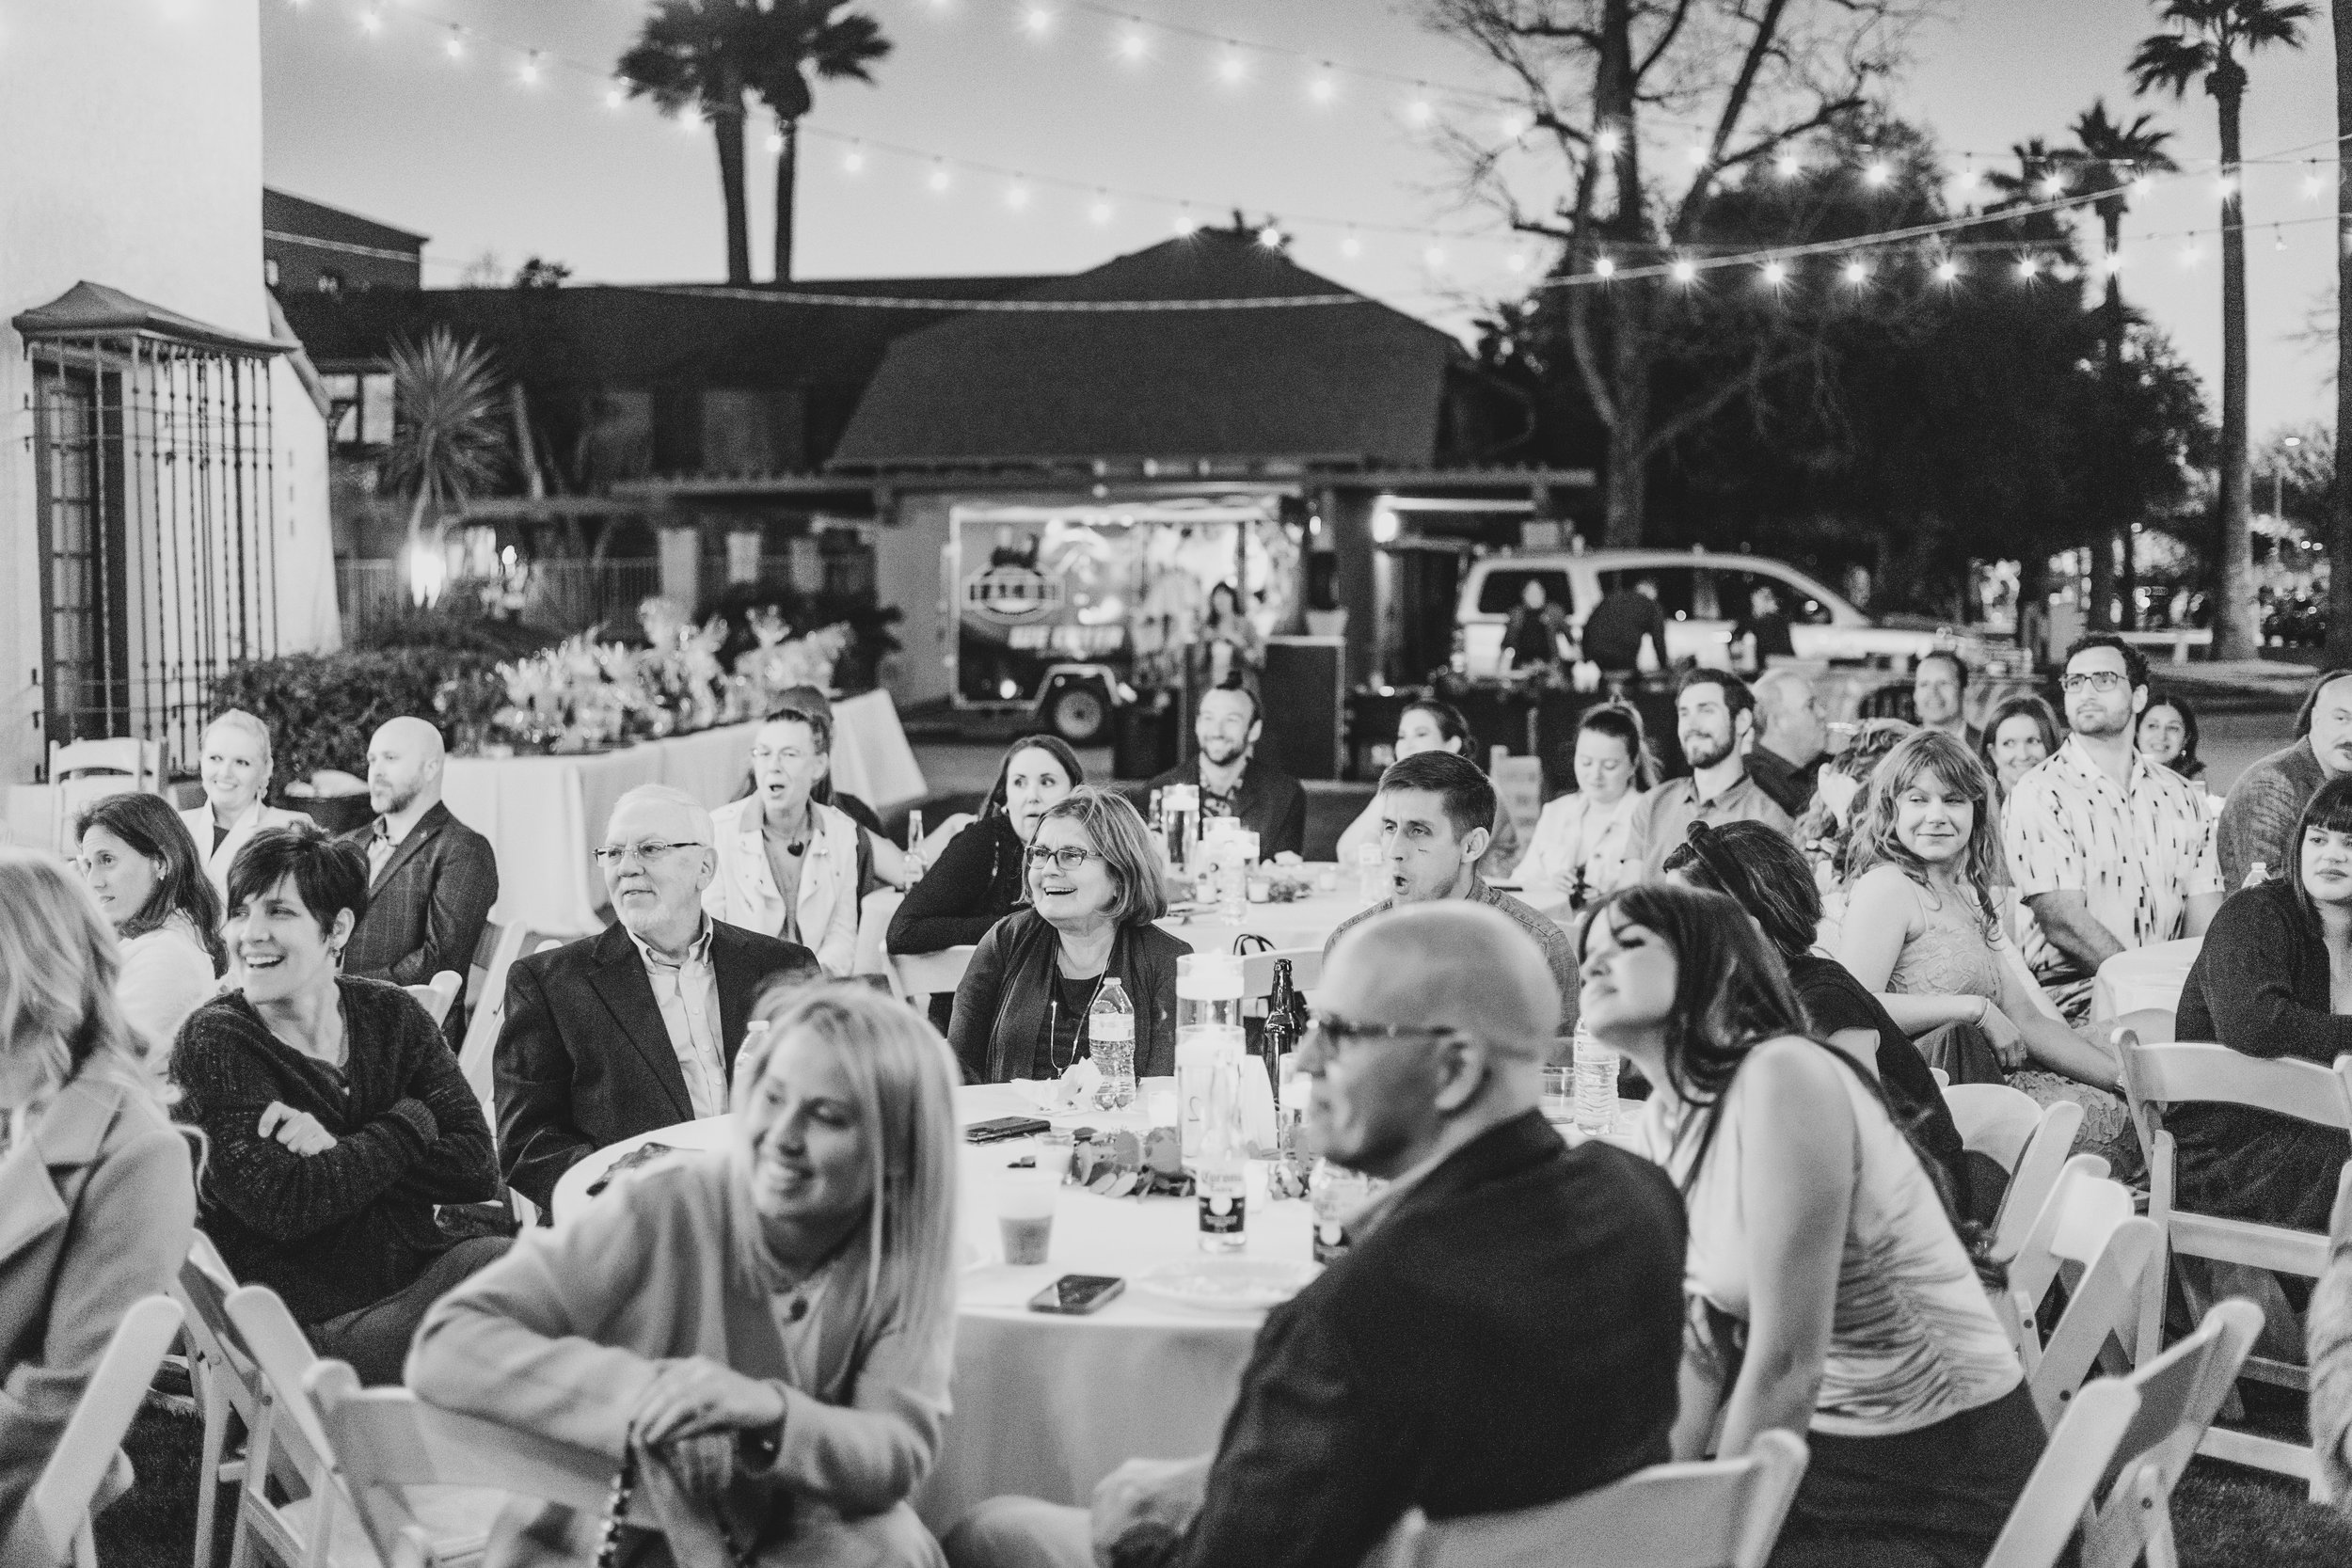 Guests at dinner during a Private Corporate event at the Coronado House a Historic Downtown Phoenix's newest venue, by Professional Corporate Event Photographer; Jennifer Lind Schutsky.